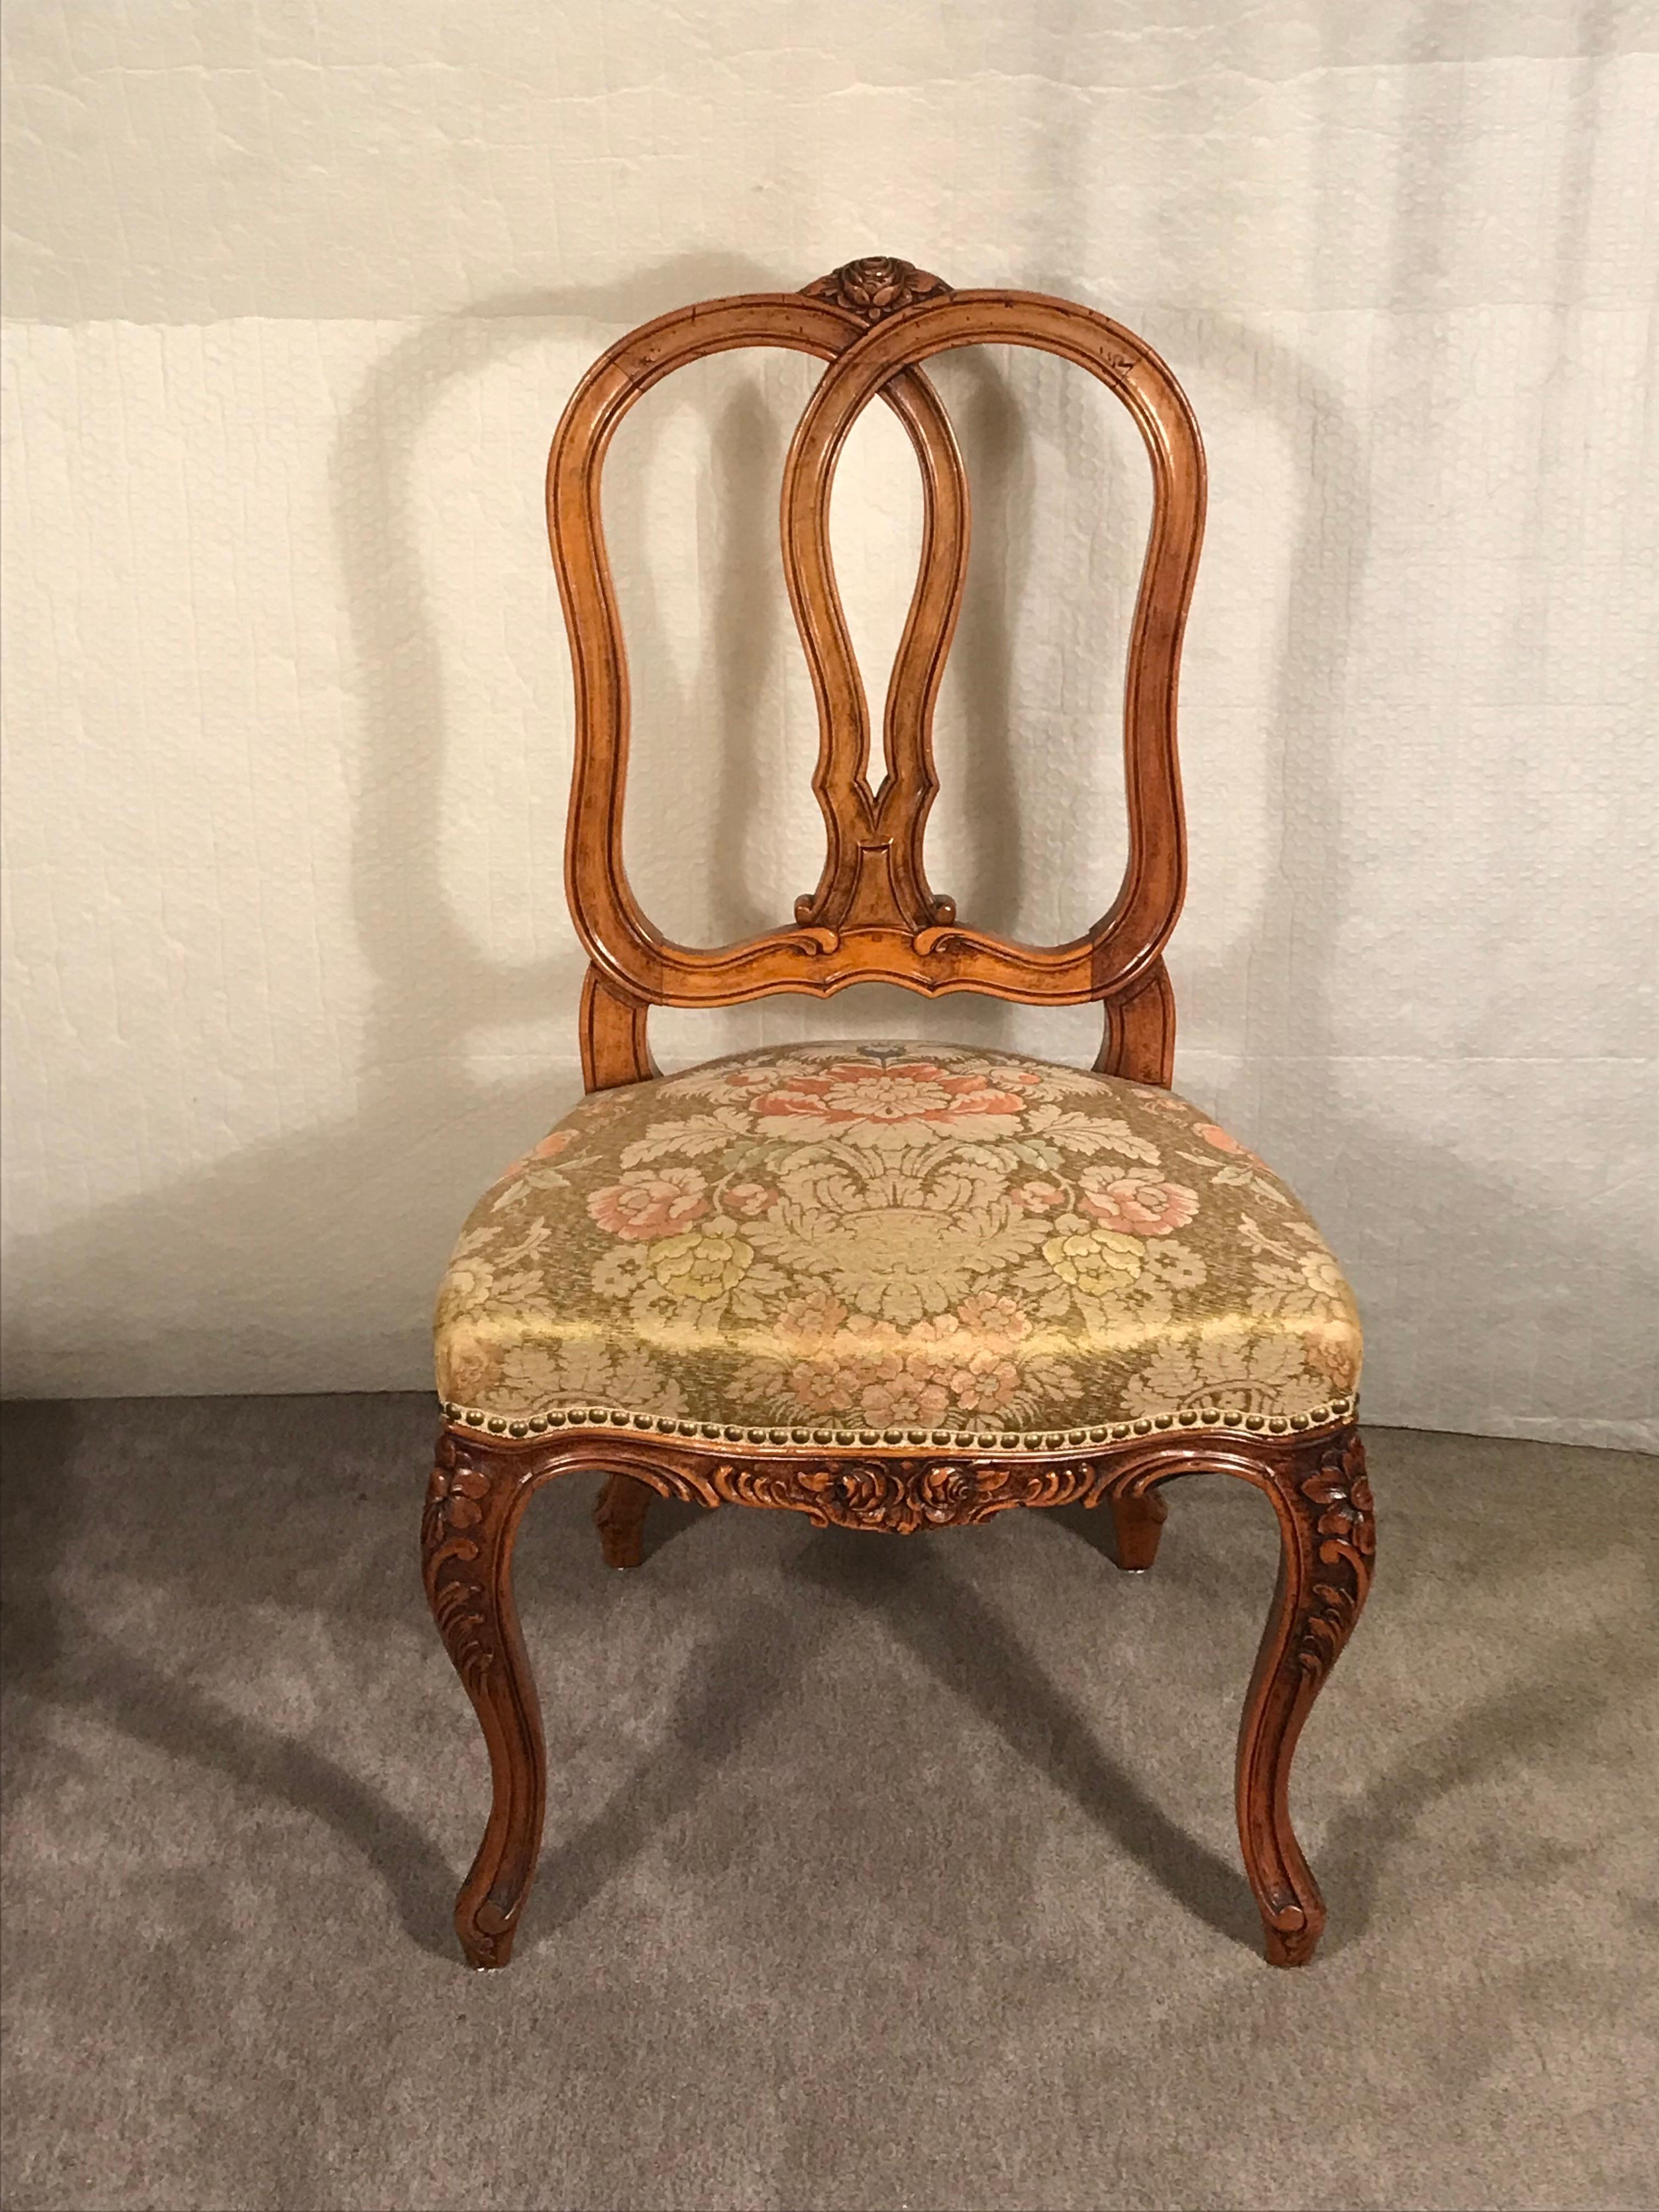 This set of four Baroque Style chairs have a beautifully hand-carved flower and rocaille decor. The chairs date back to the 19th century and were made around 1860-70. They are in original condition and have been covered with a floral brocade fabric. 